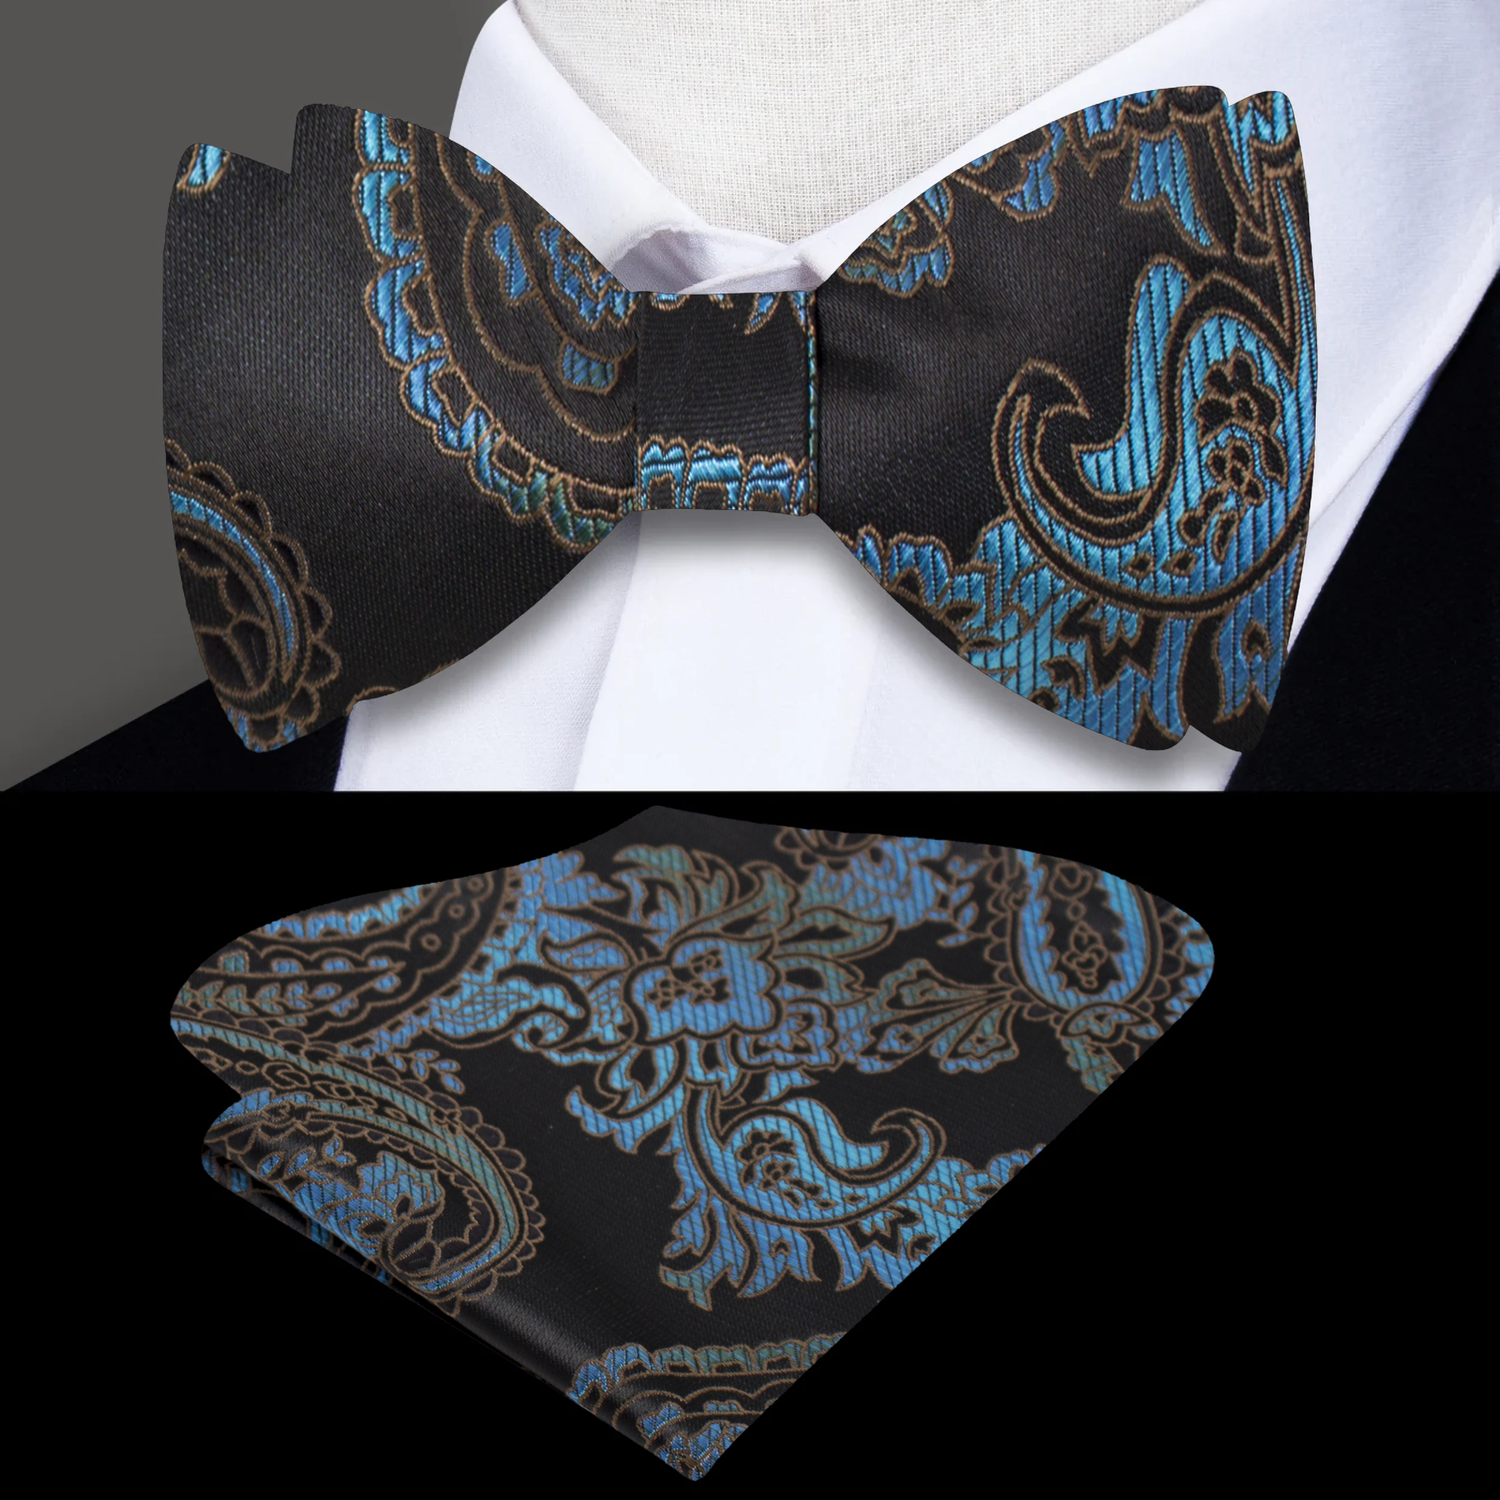 A Black, Teal Paisley Pattern Silk Self Tie Bow Tie, Matching Pocket Square